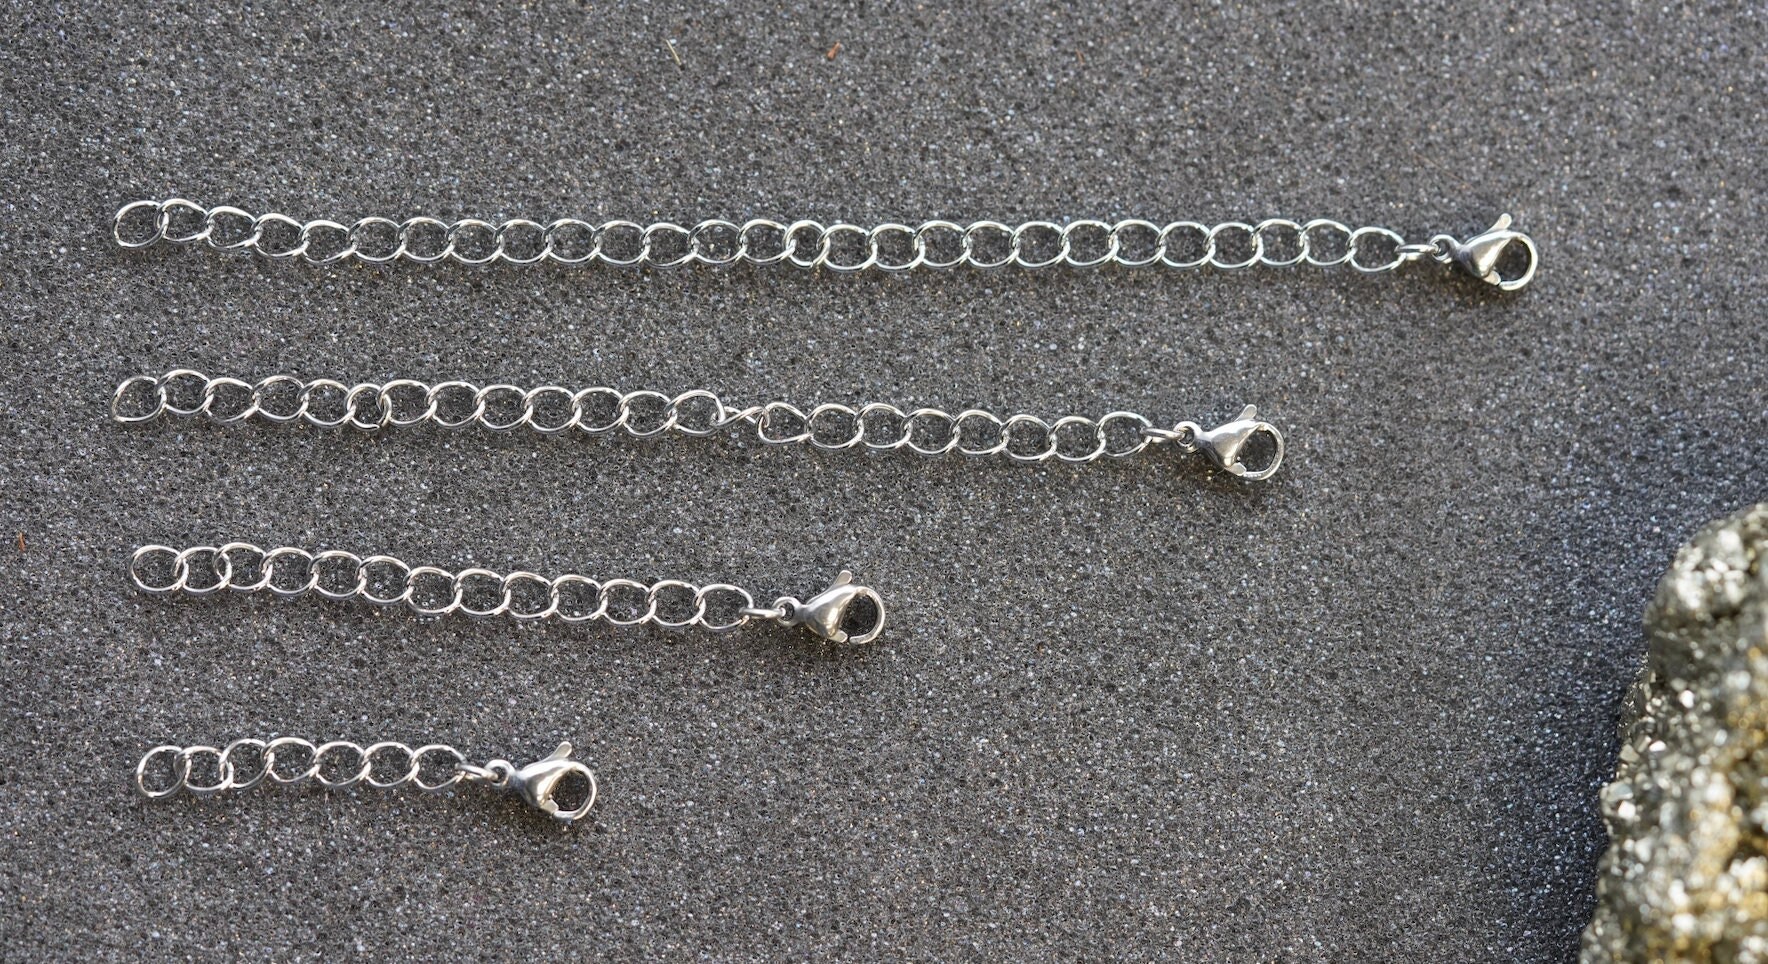 Heavy Duty Adjustable Extender Chain, 925 Sterling Silver, 2 Inch